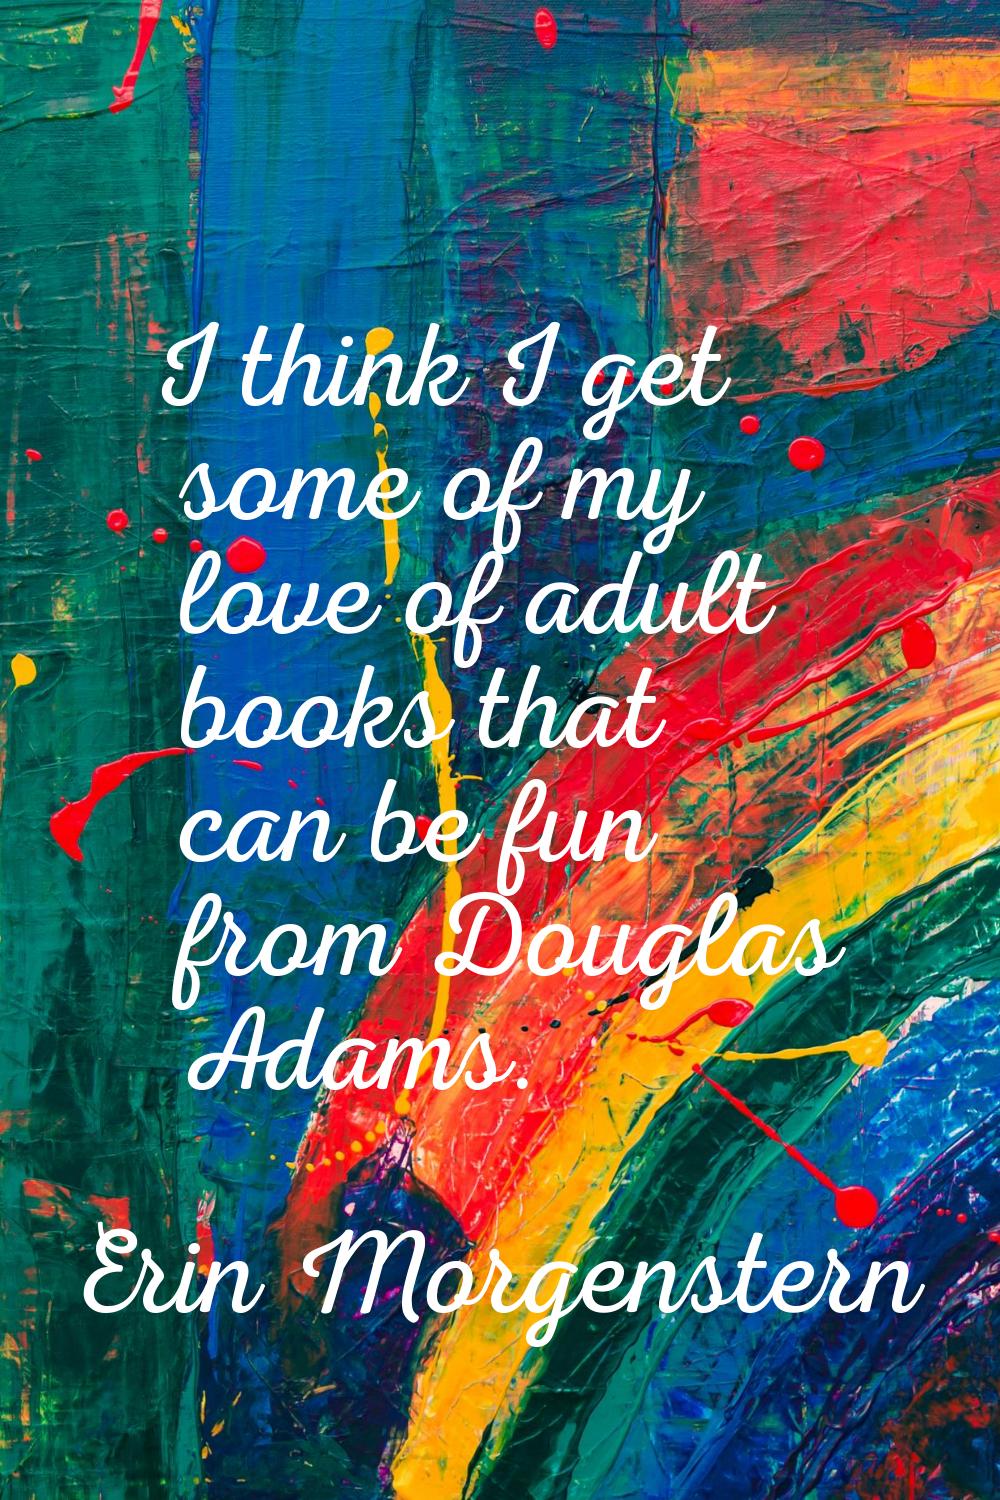 I think I get some of my love of adult books that can be fun from Douglas Adams.